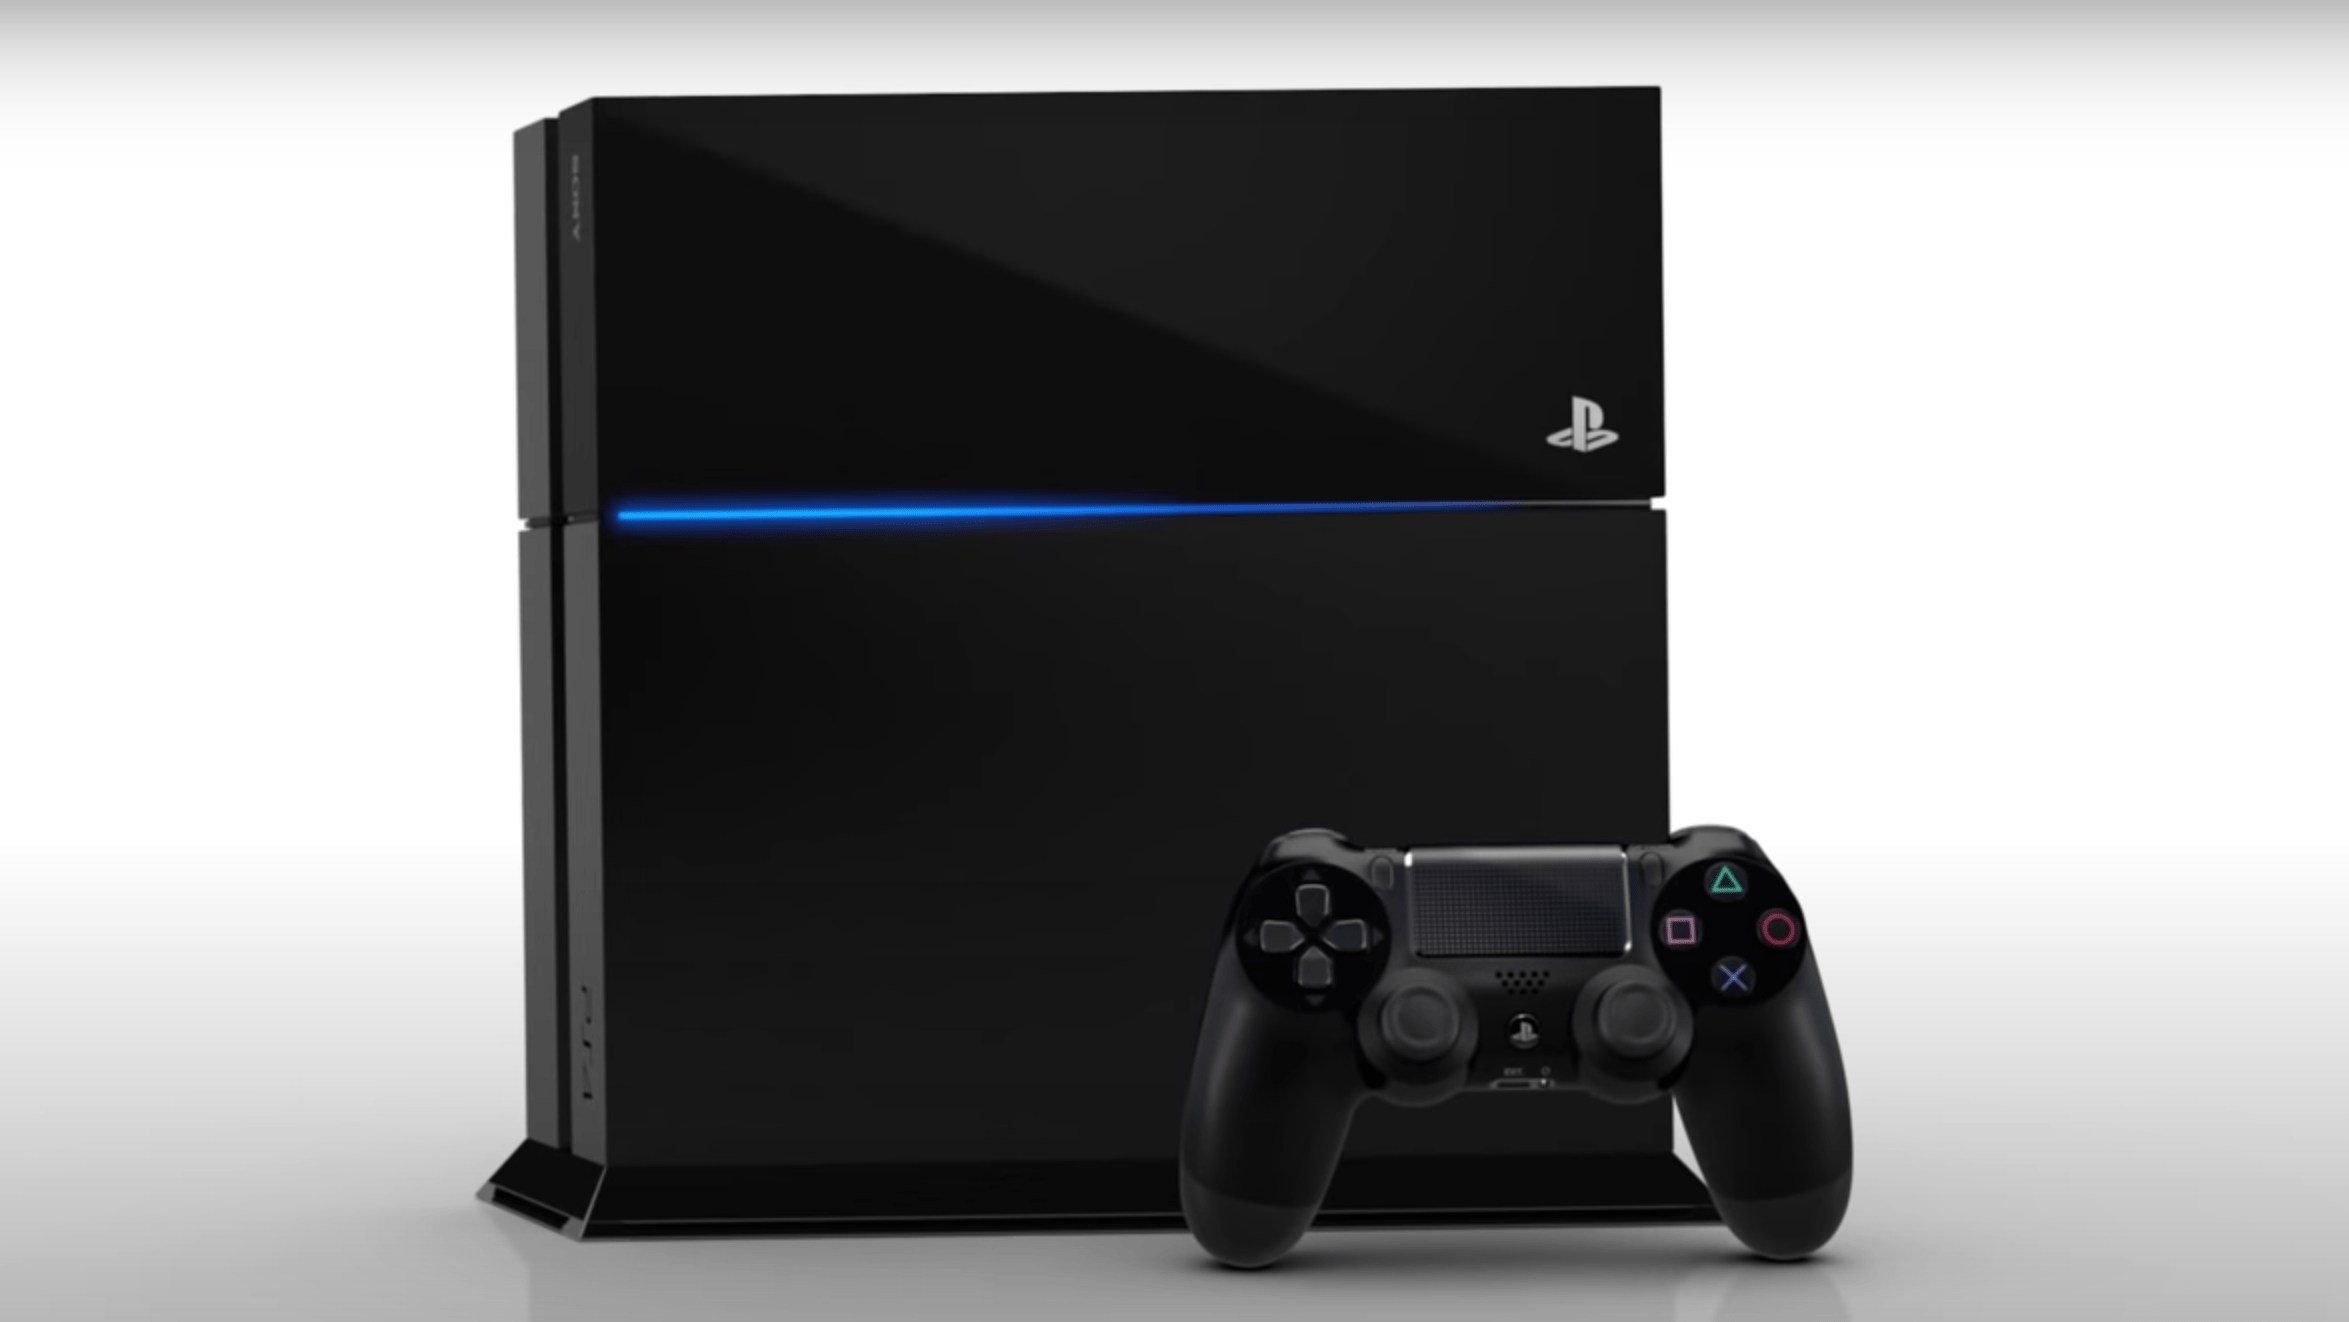 Sony playstation когда вышла. Плейстейшен 4. ПС 4 фат. Ps4 PLAYSTATION 4 Gold.